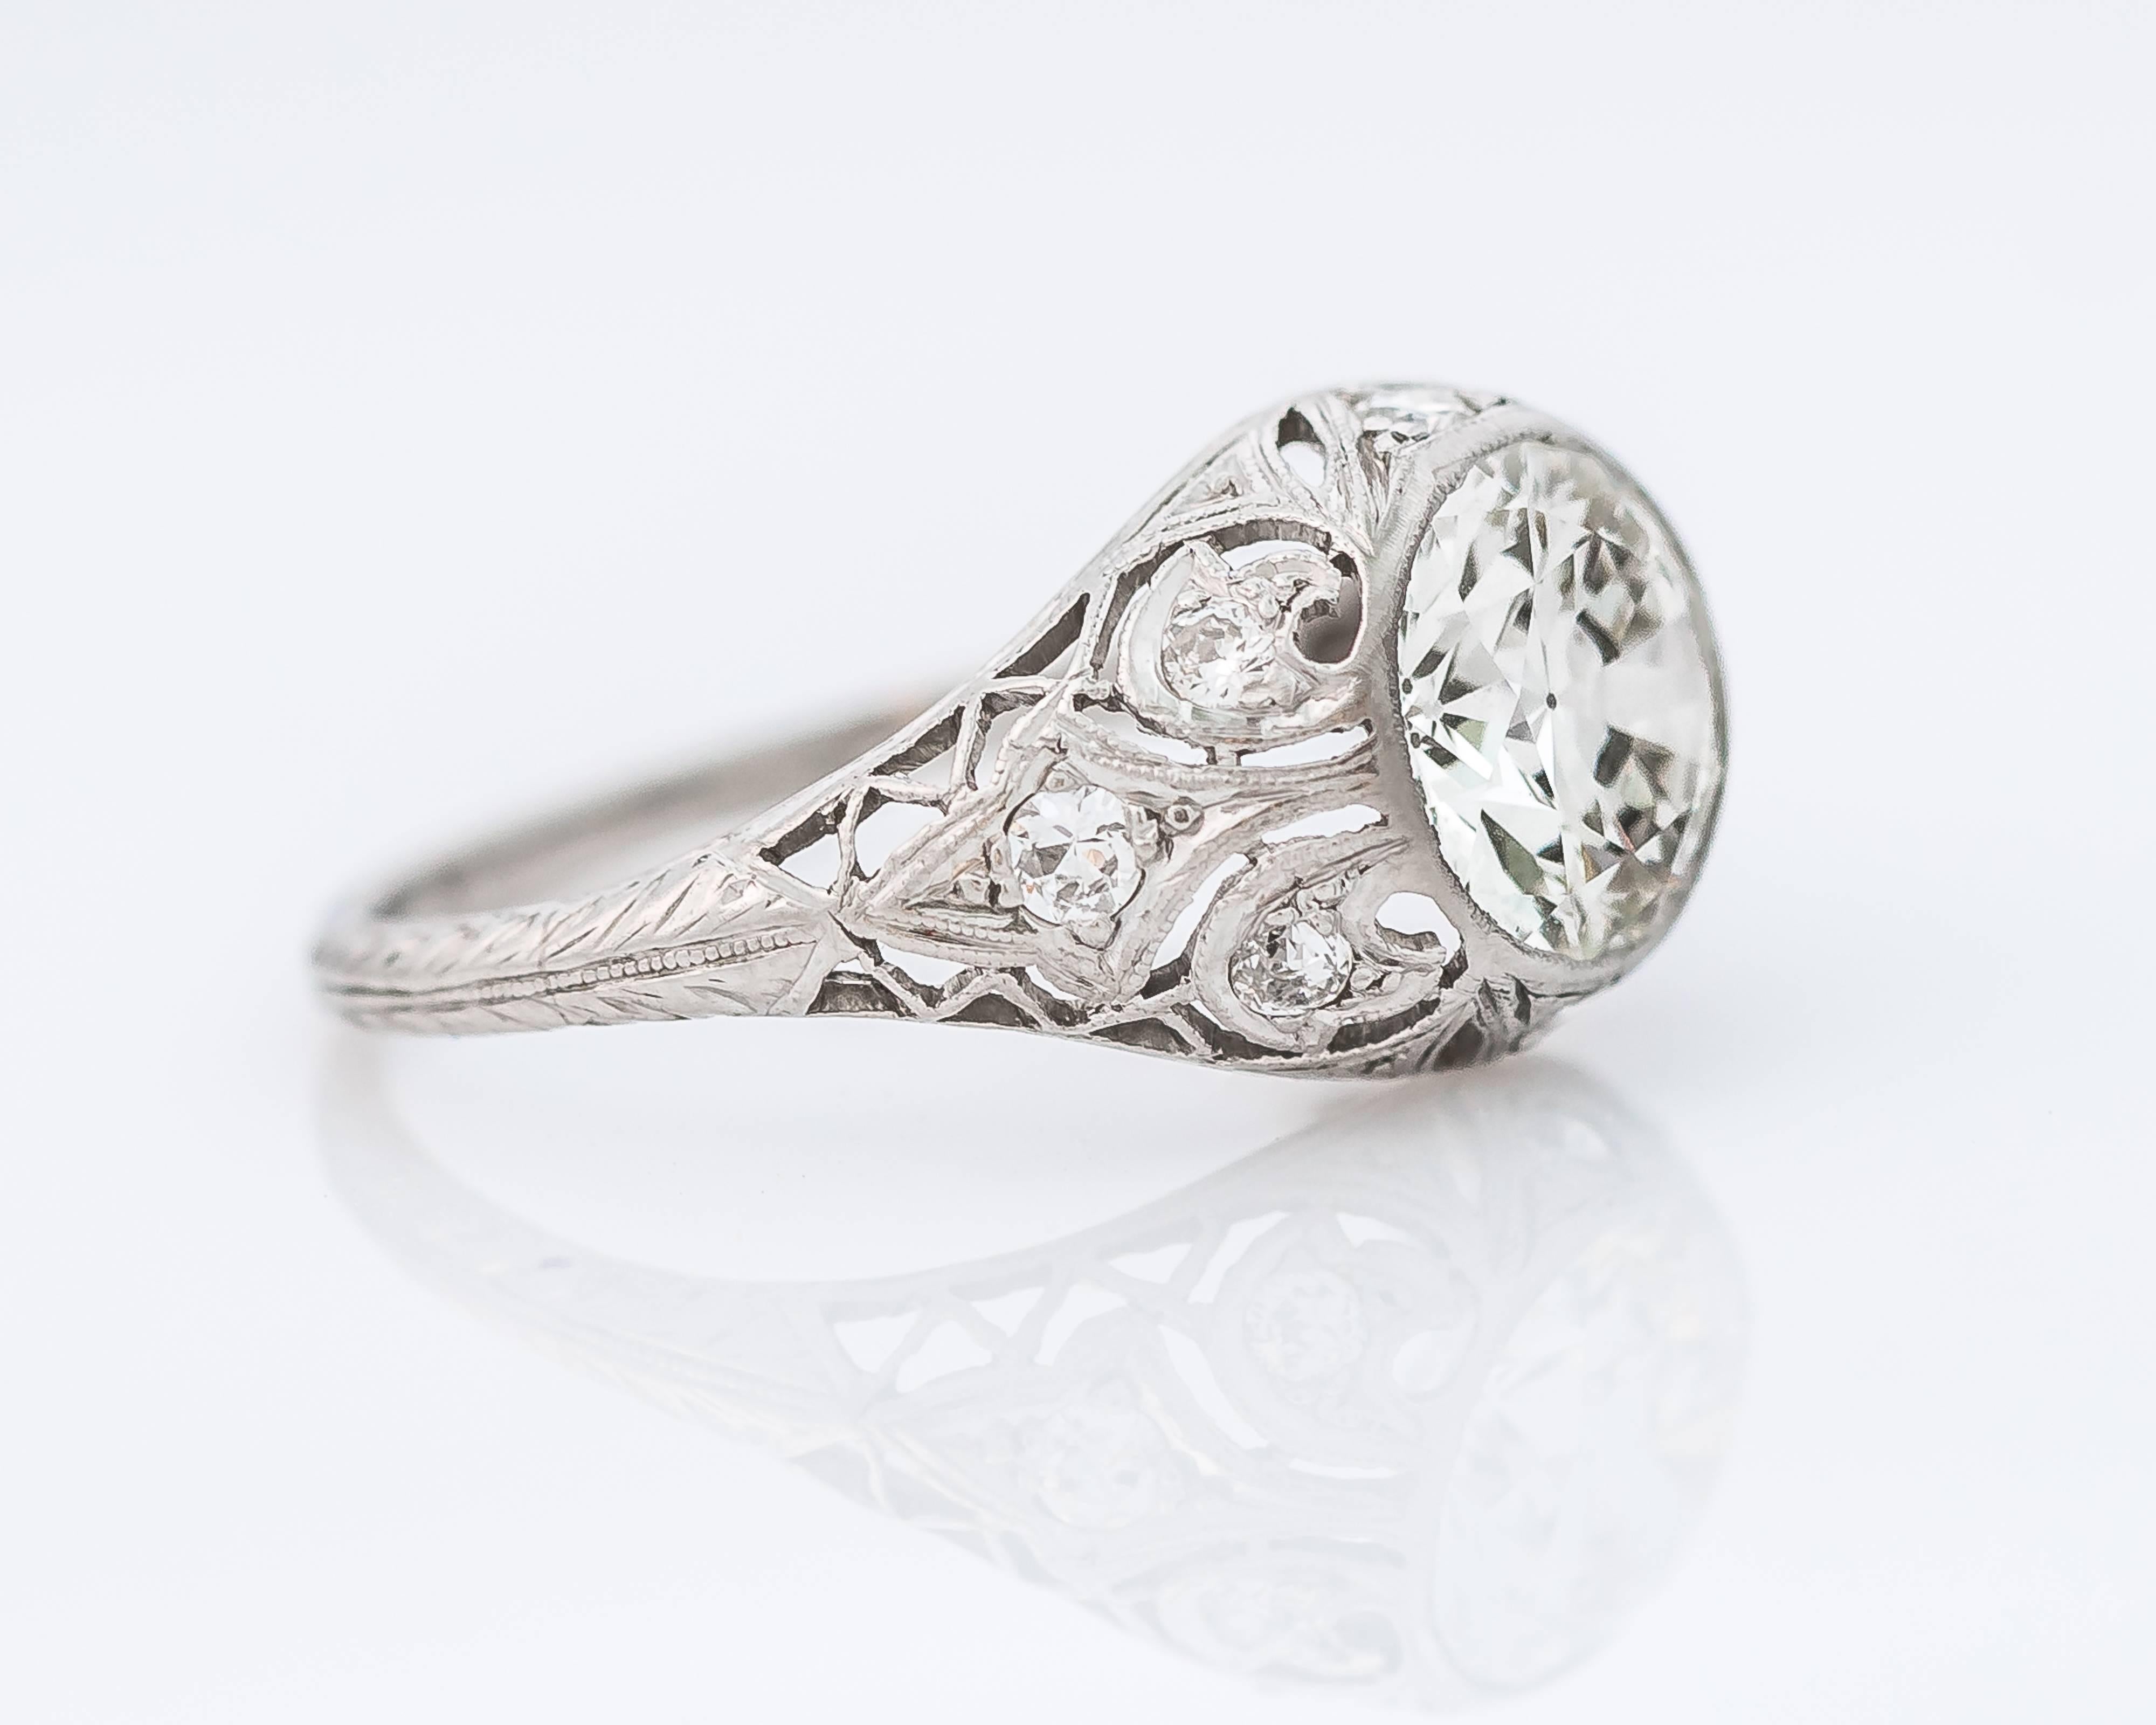 This stunning, timeless 1925 antique art deco engagement ring features a 2.85 carat Old European cut center stone bezel set in a delicate filigree platinum. The gallery work and etching through the shank is a beautiful add-on to this ring, giving it